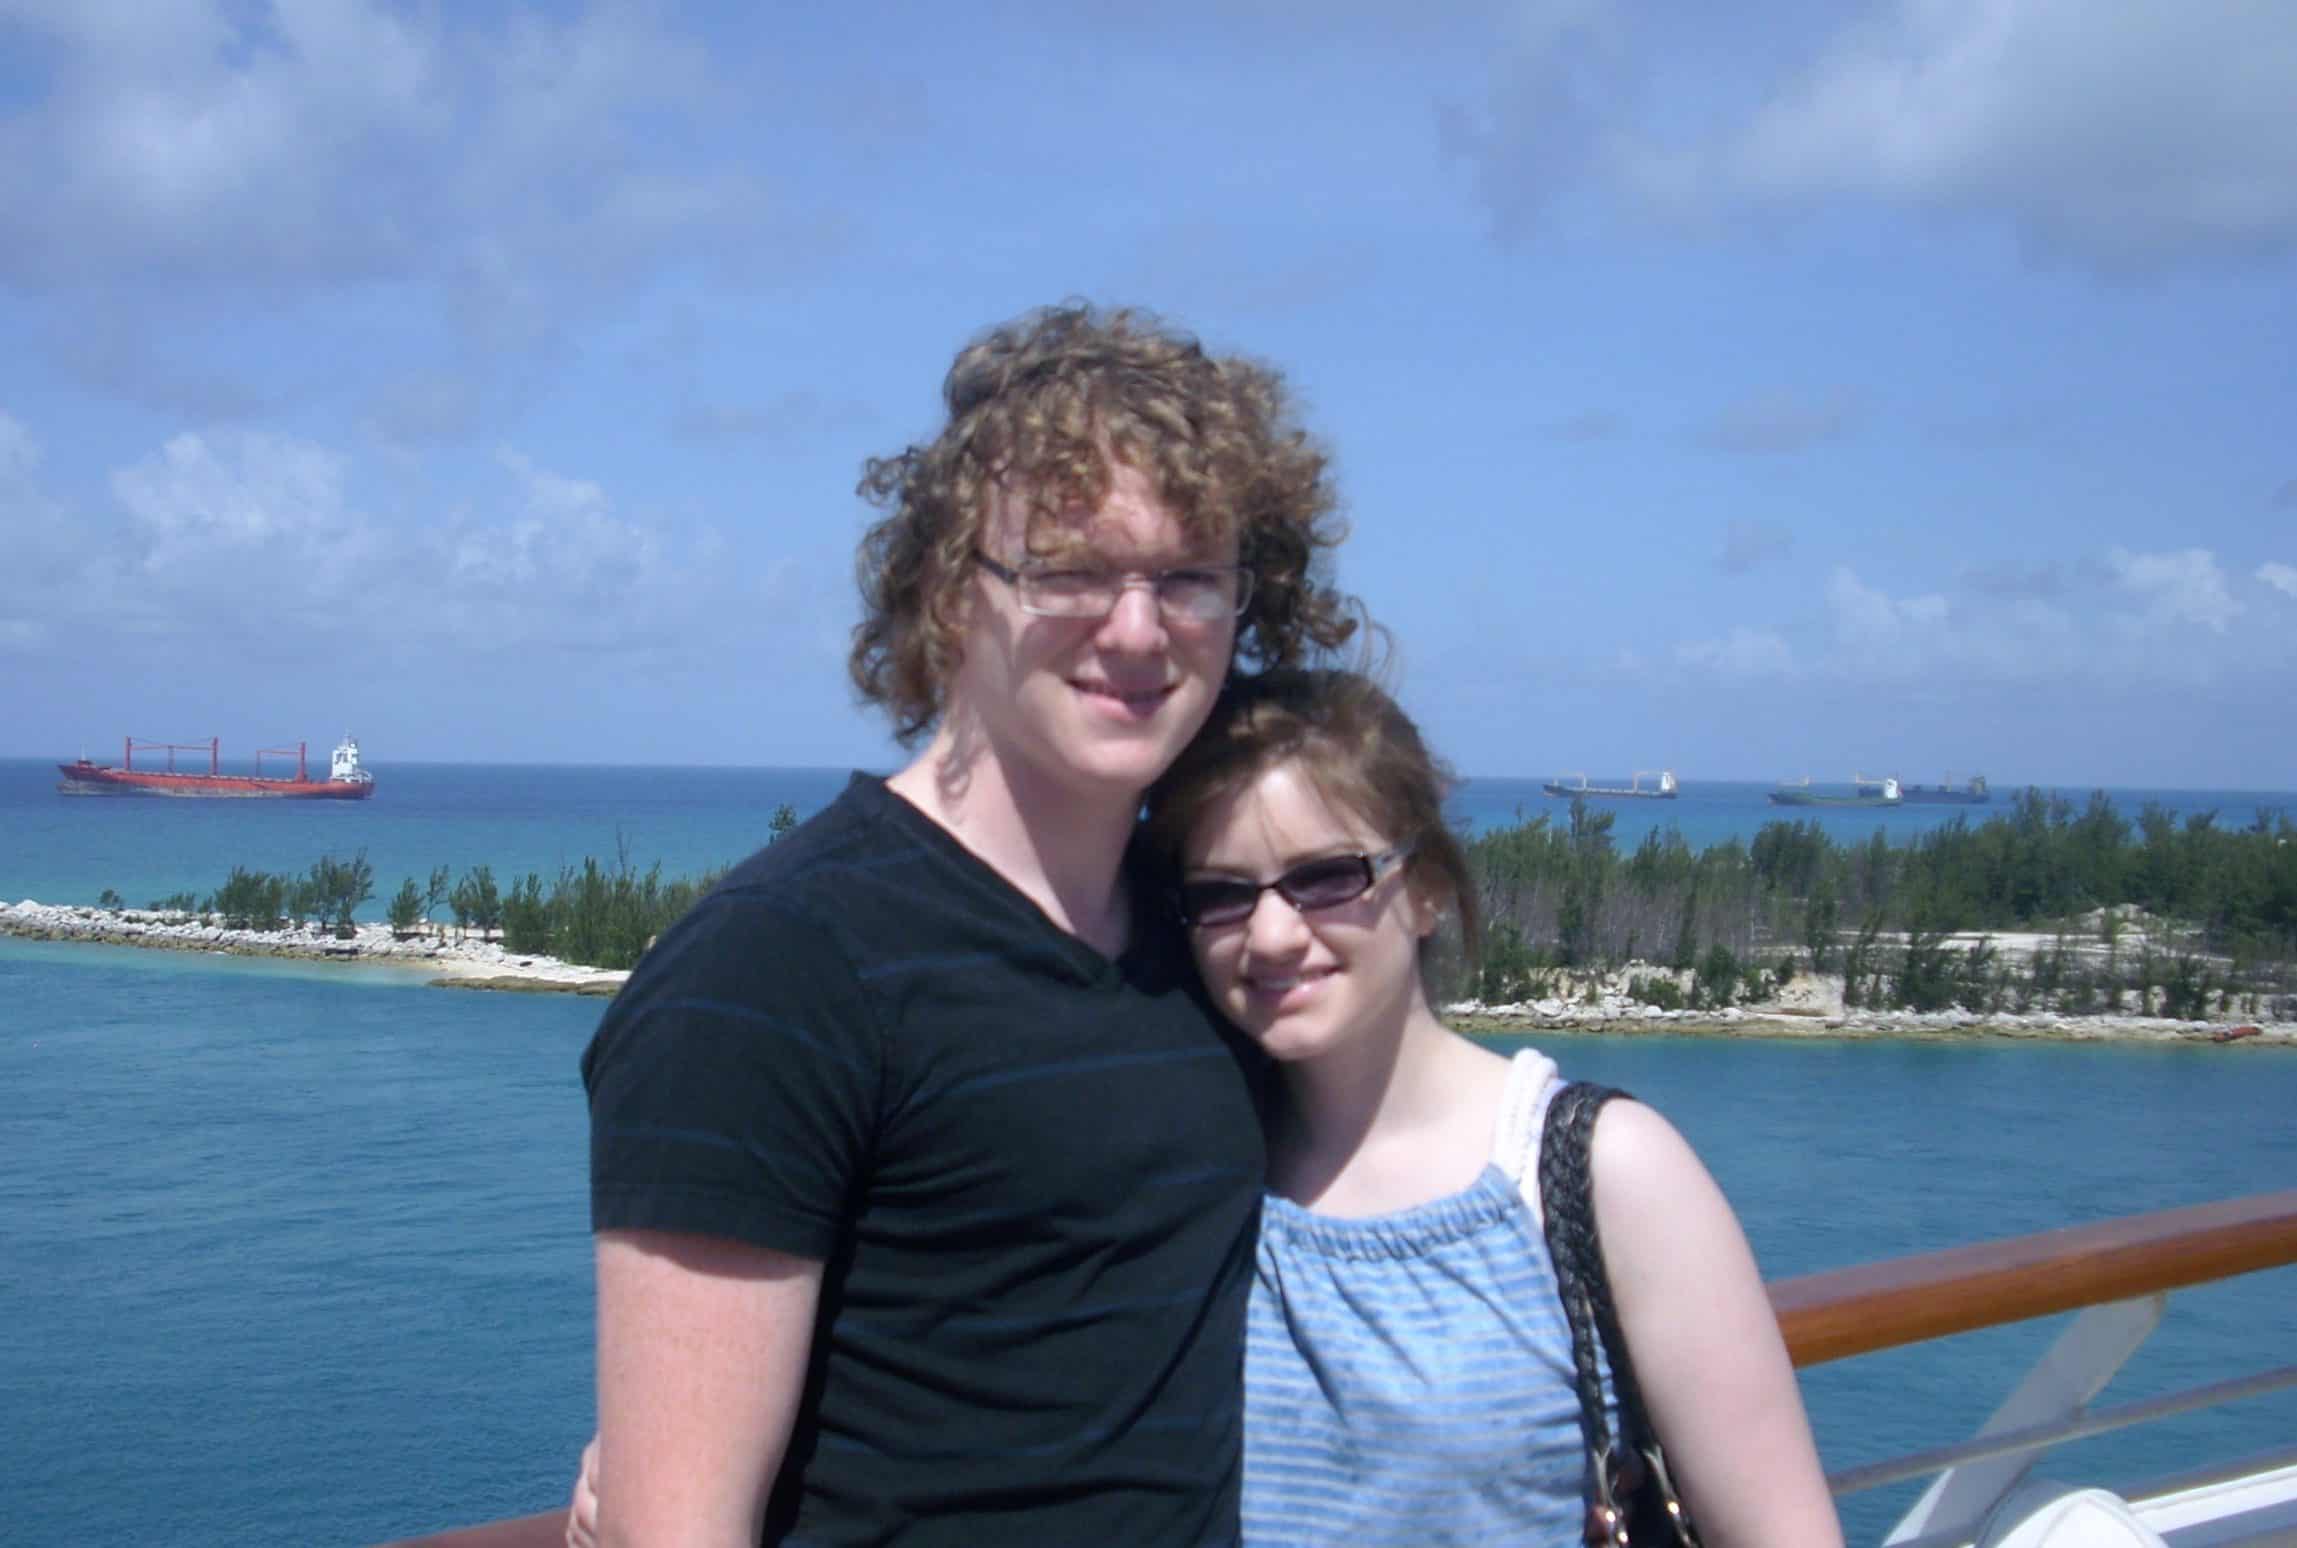 Derek and Kacie in front of the ocean in the Bahama Islands